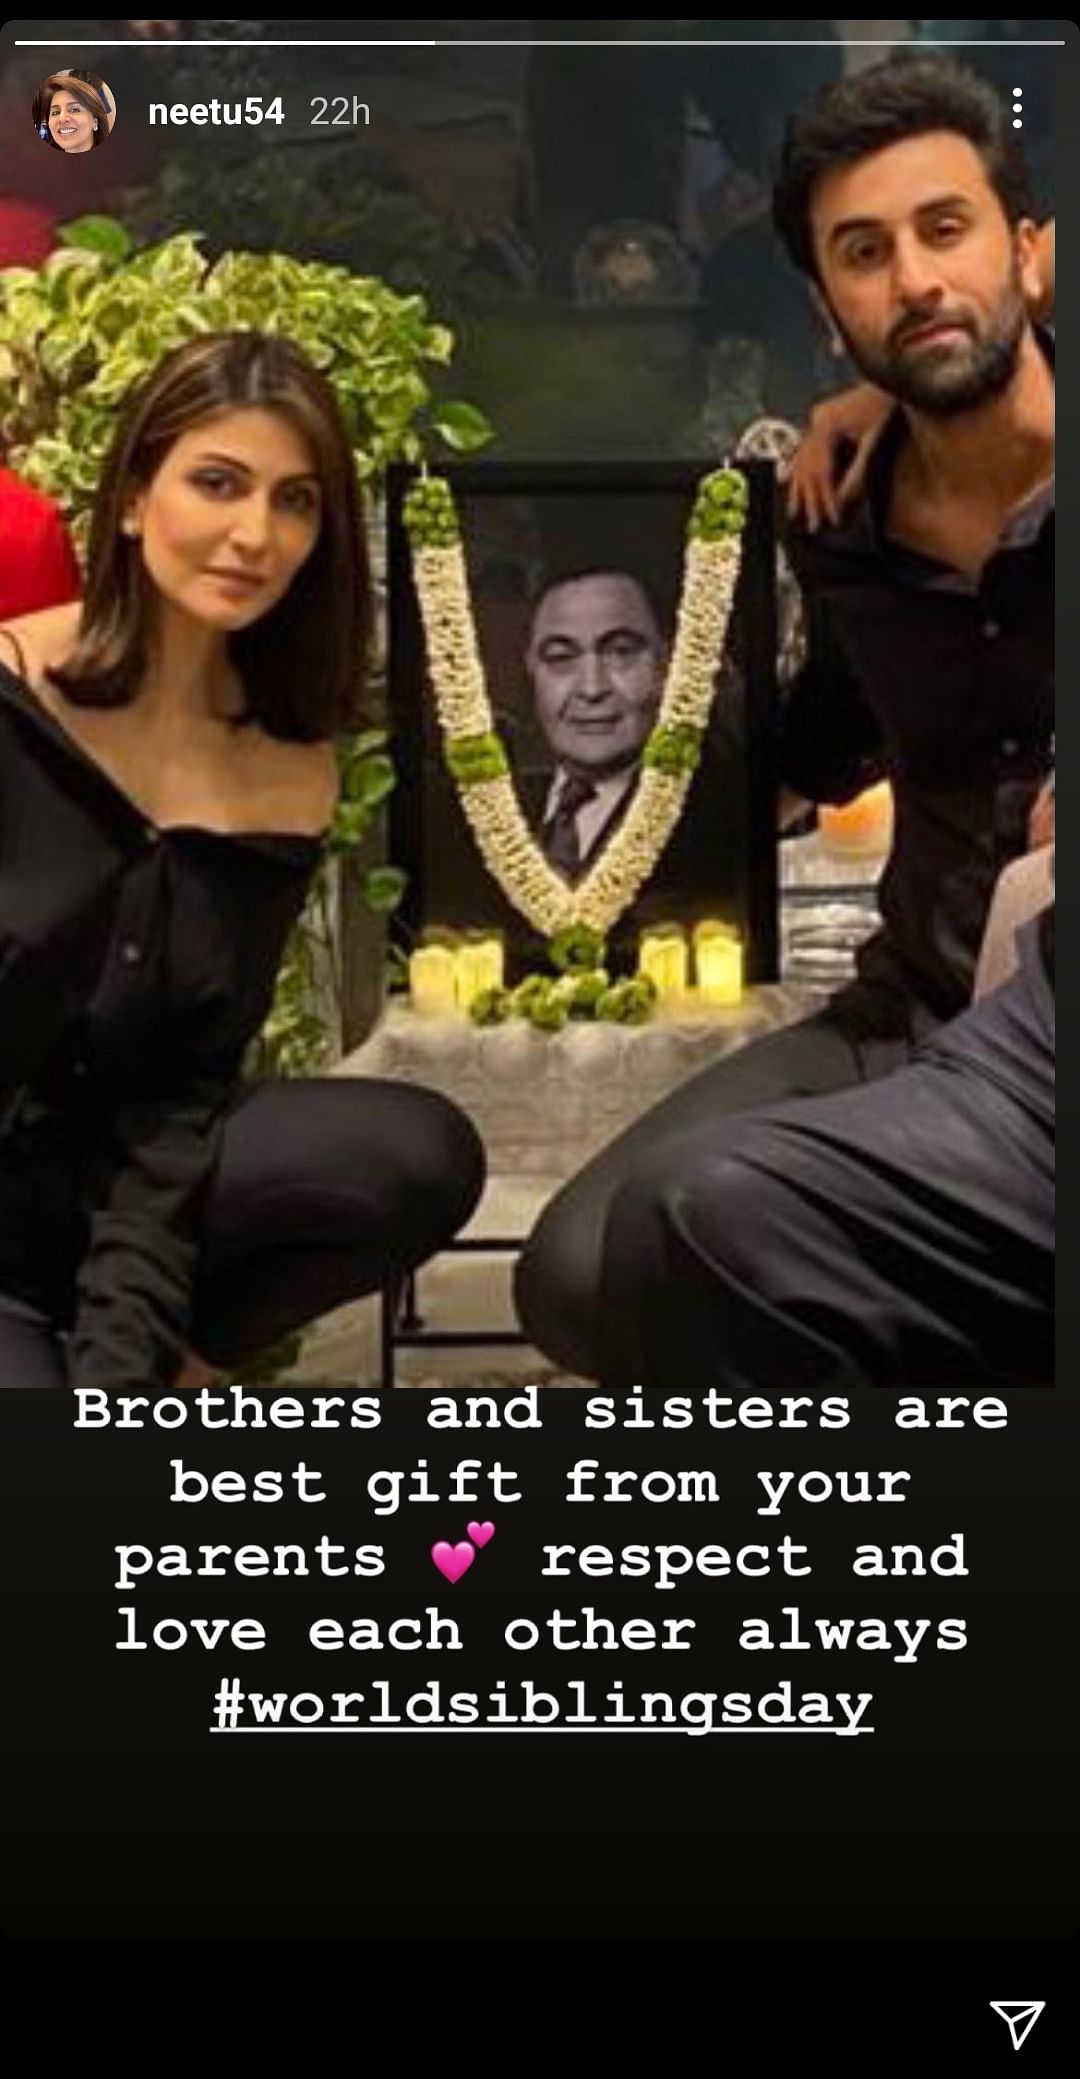 Neetu Kapoor shared a picture of siblings Raddhima and Ranbir with a portrait of Late Rishi Kapoor